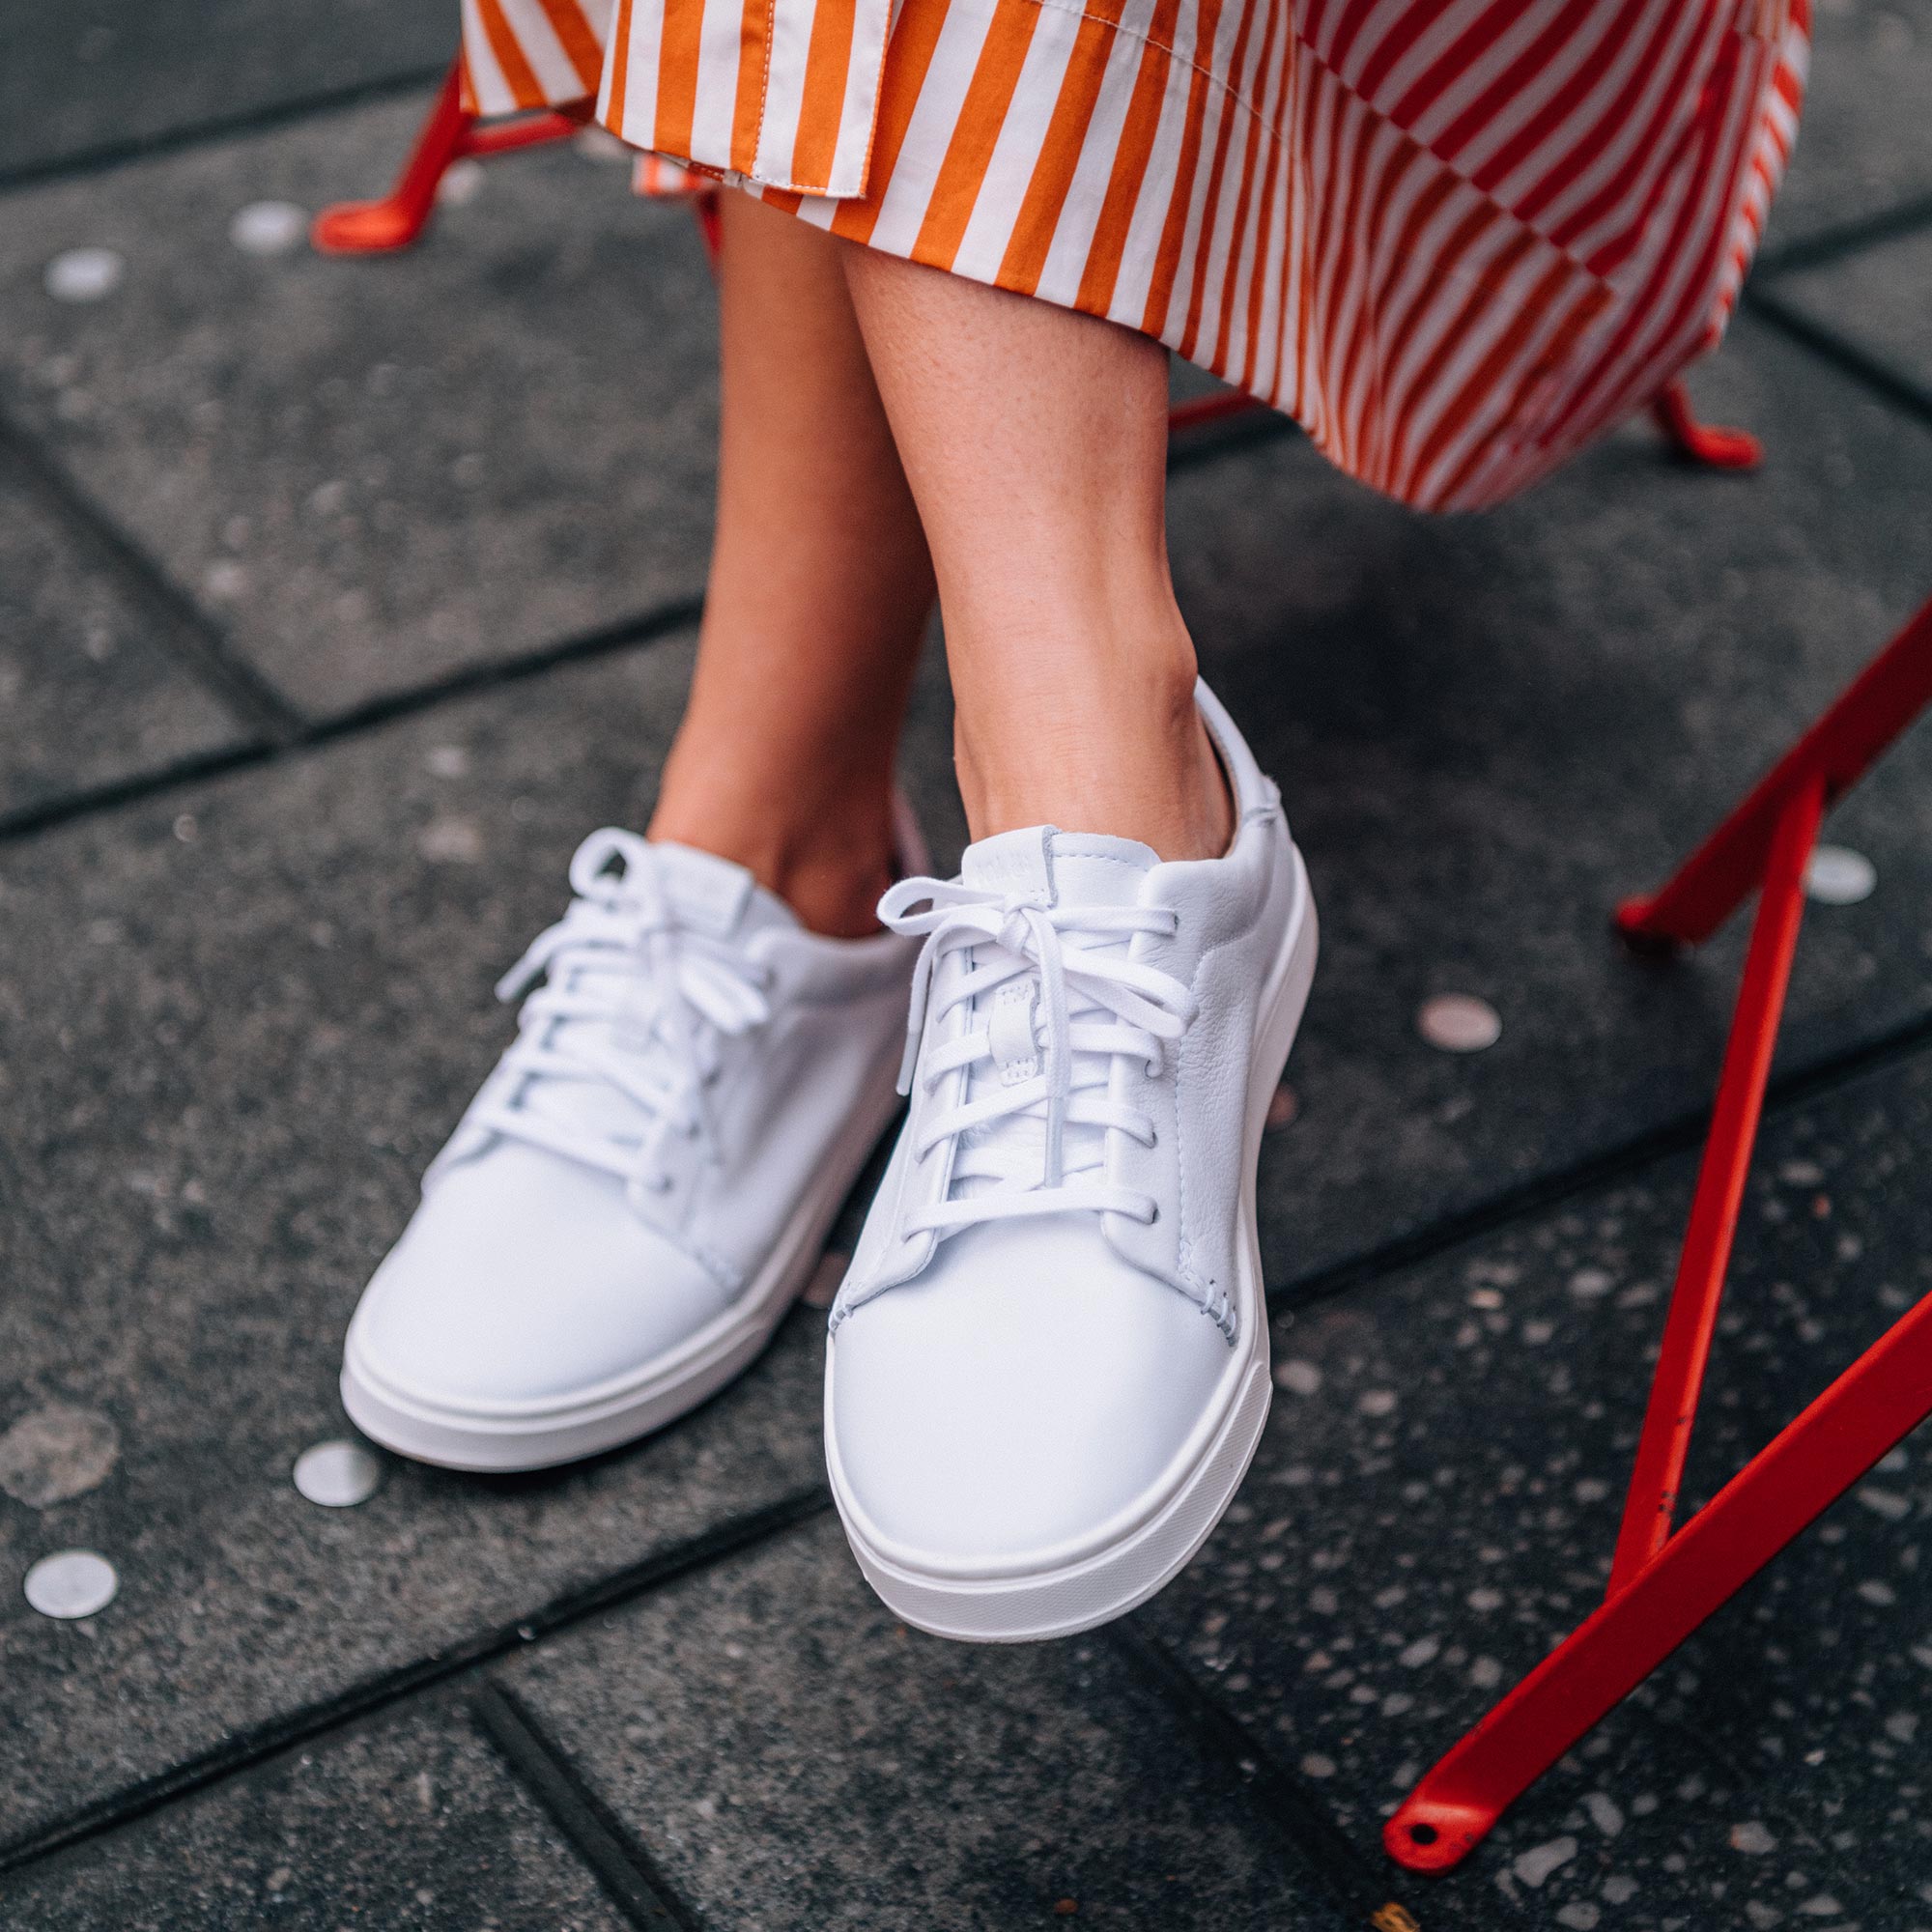 15 Pairs of Everyday Sneakers that Won't Break the Bank - Andee Layne